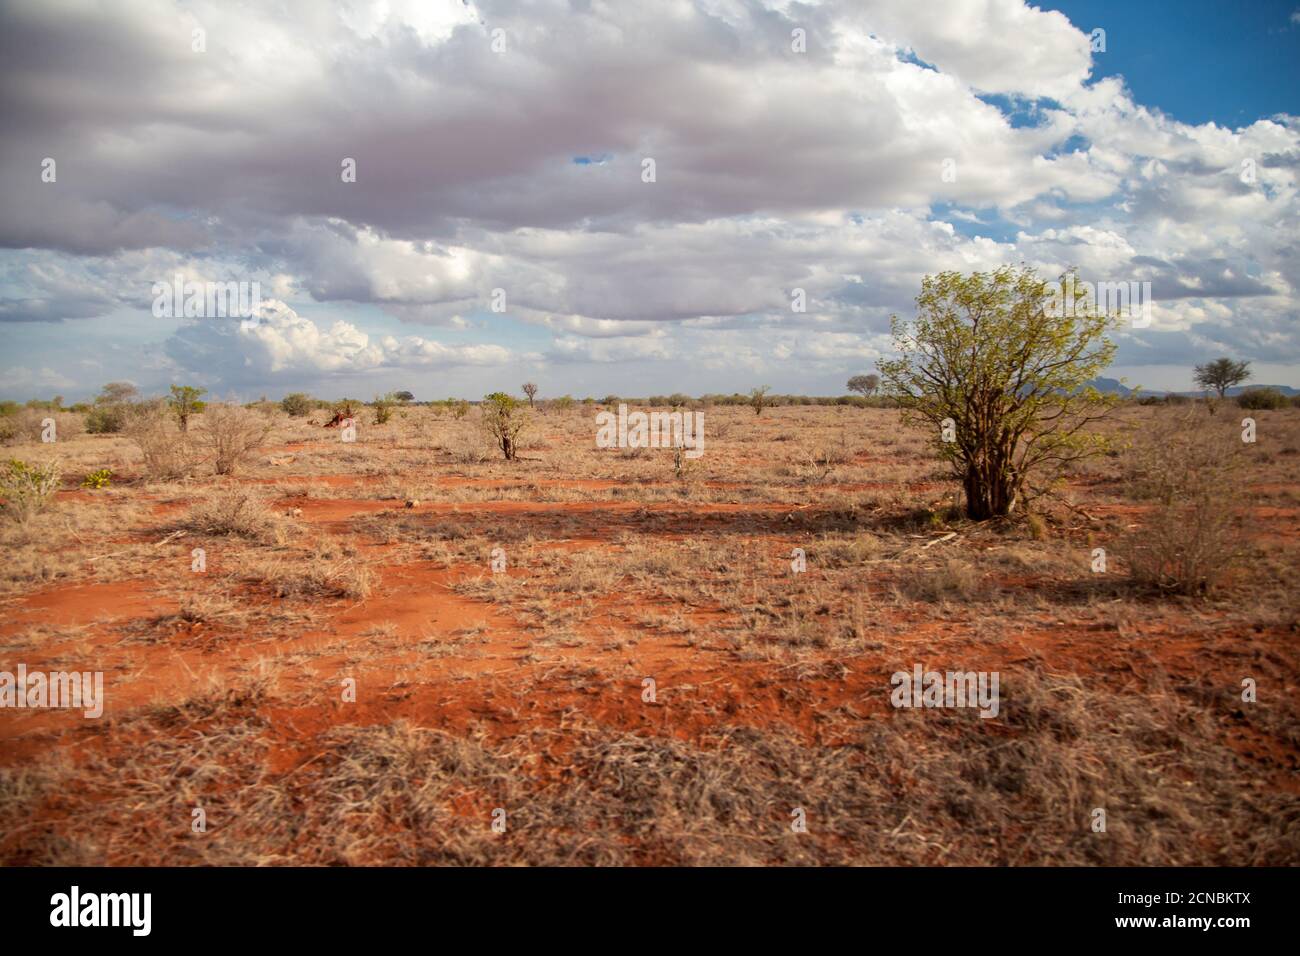 Scenery with red soil, trees, blue sky with white clouds, Kenya Stock Photo